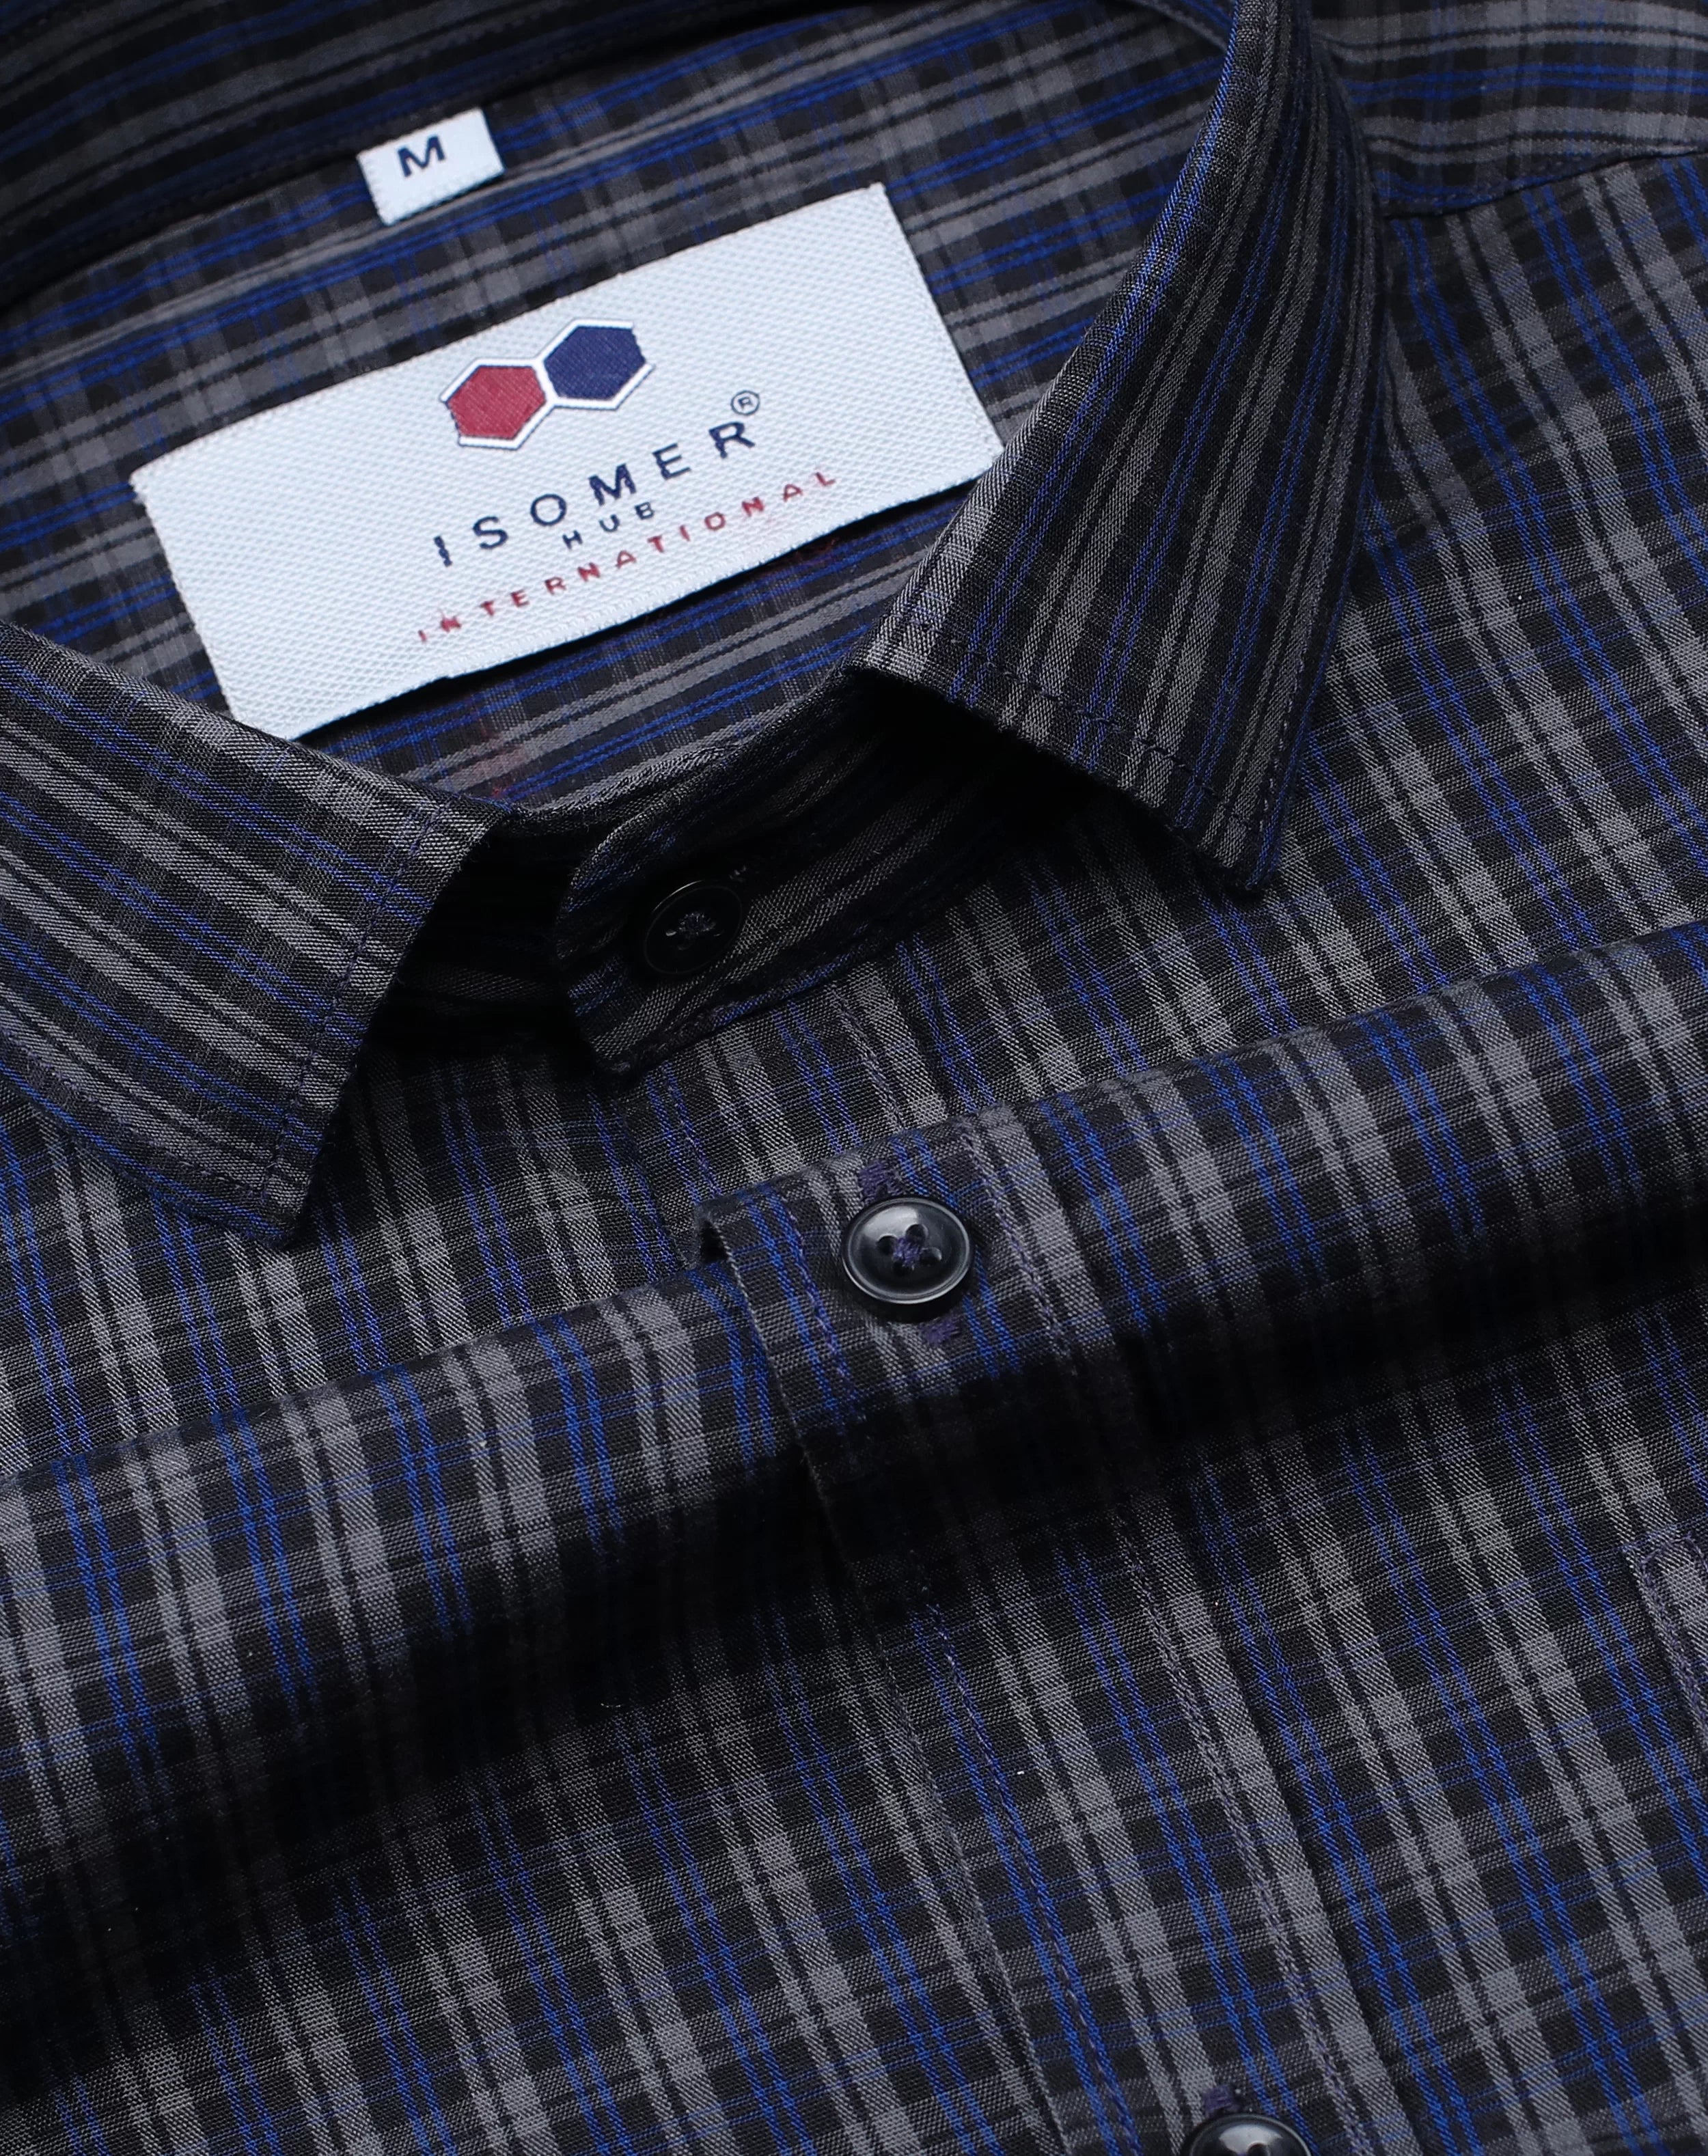 Black With Grey And Blue Tartan Checked Spread Collar Shirt